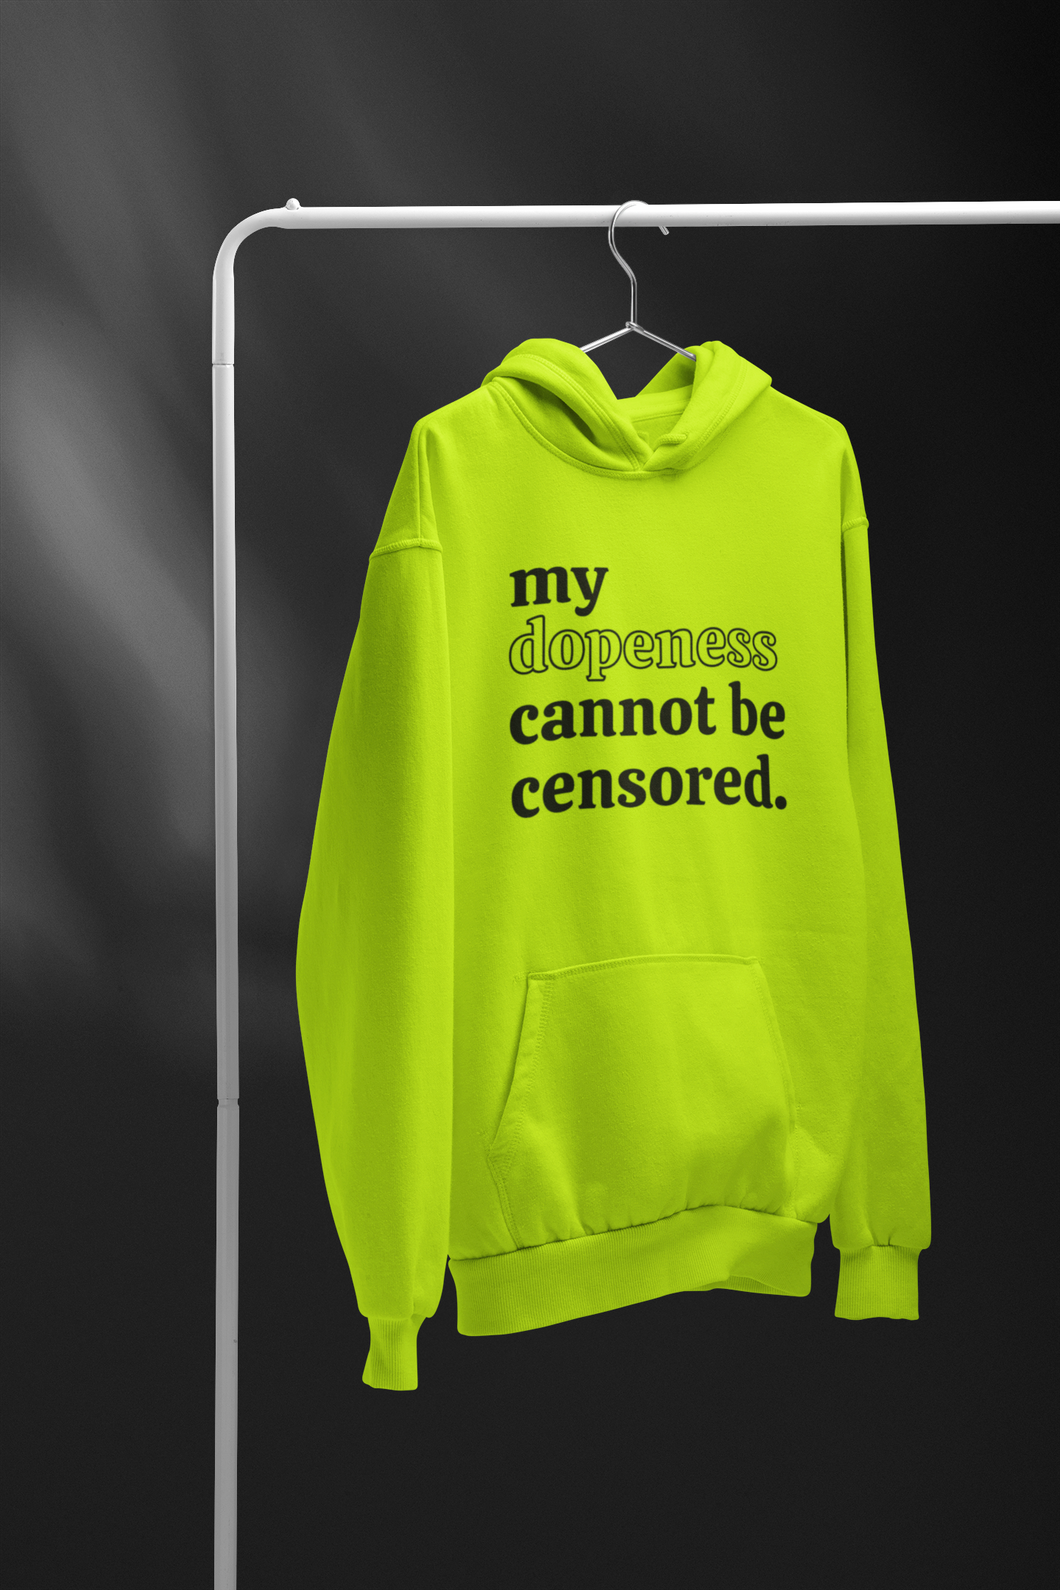 My dopeness cannot be censored